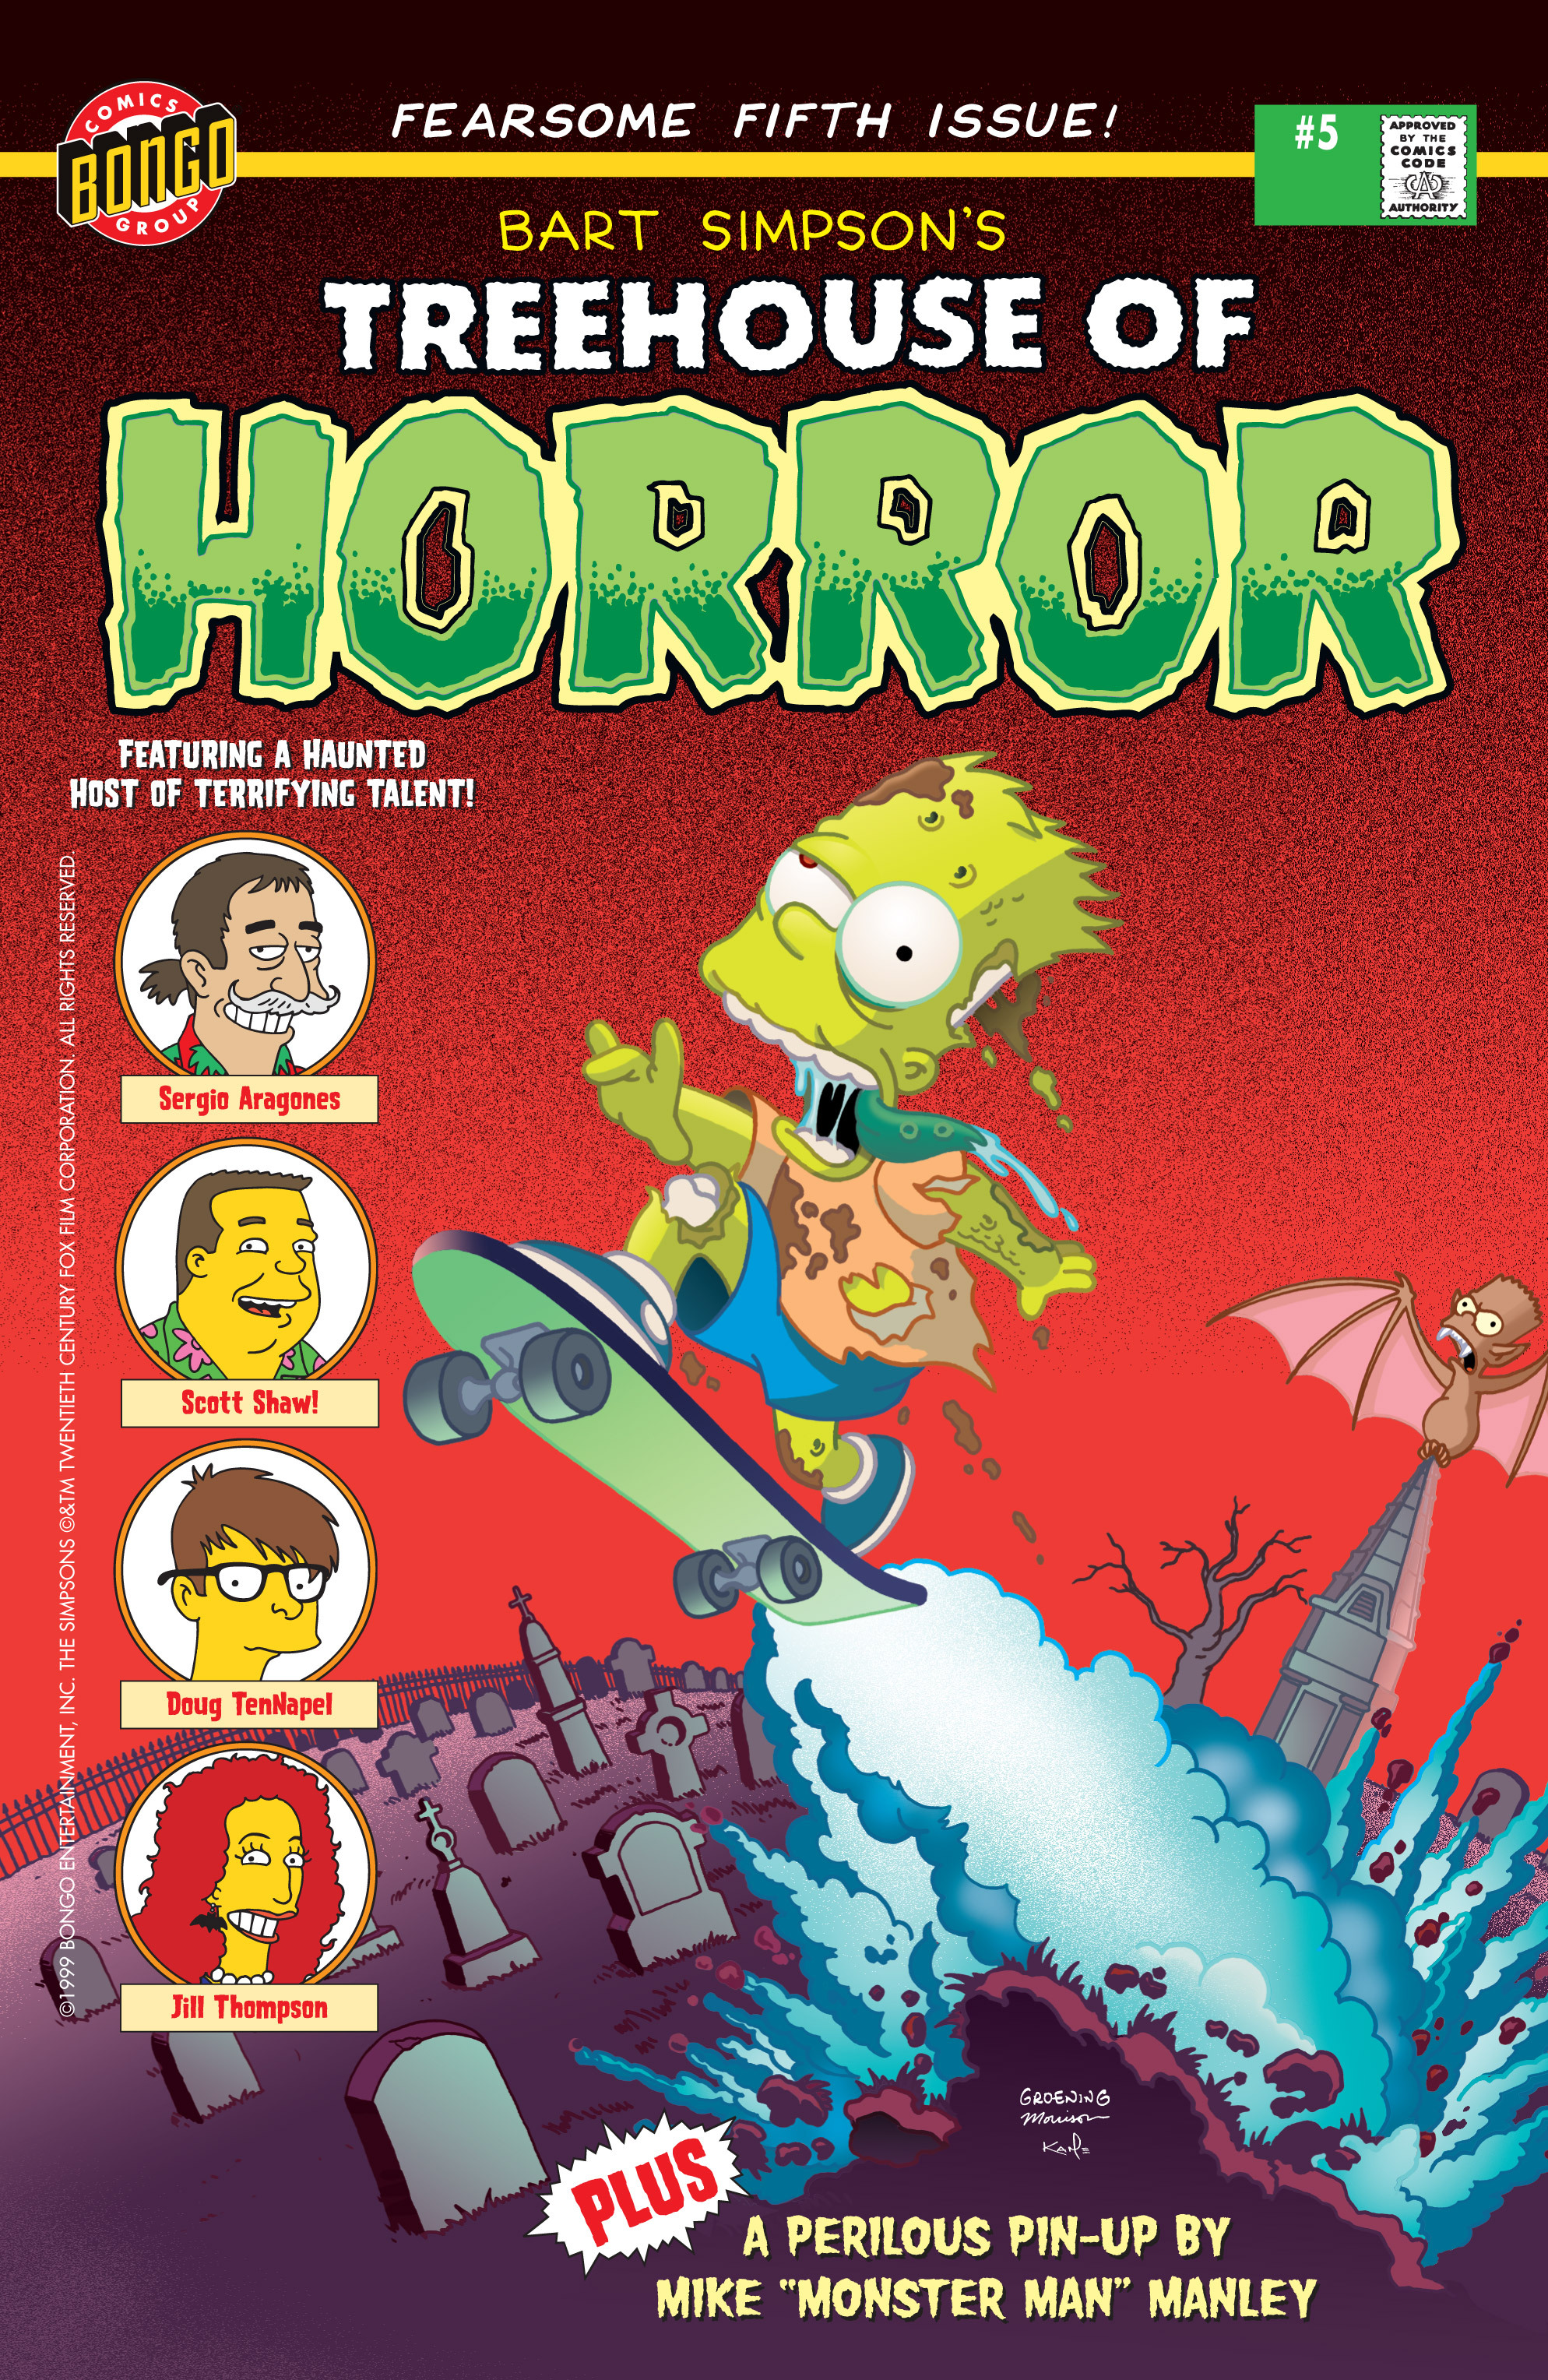 Bart Simpson's Treehouse of Horror (1995-): Chapter 5 - Page 1